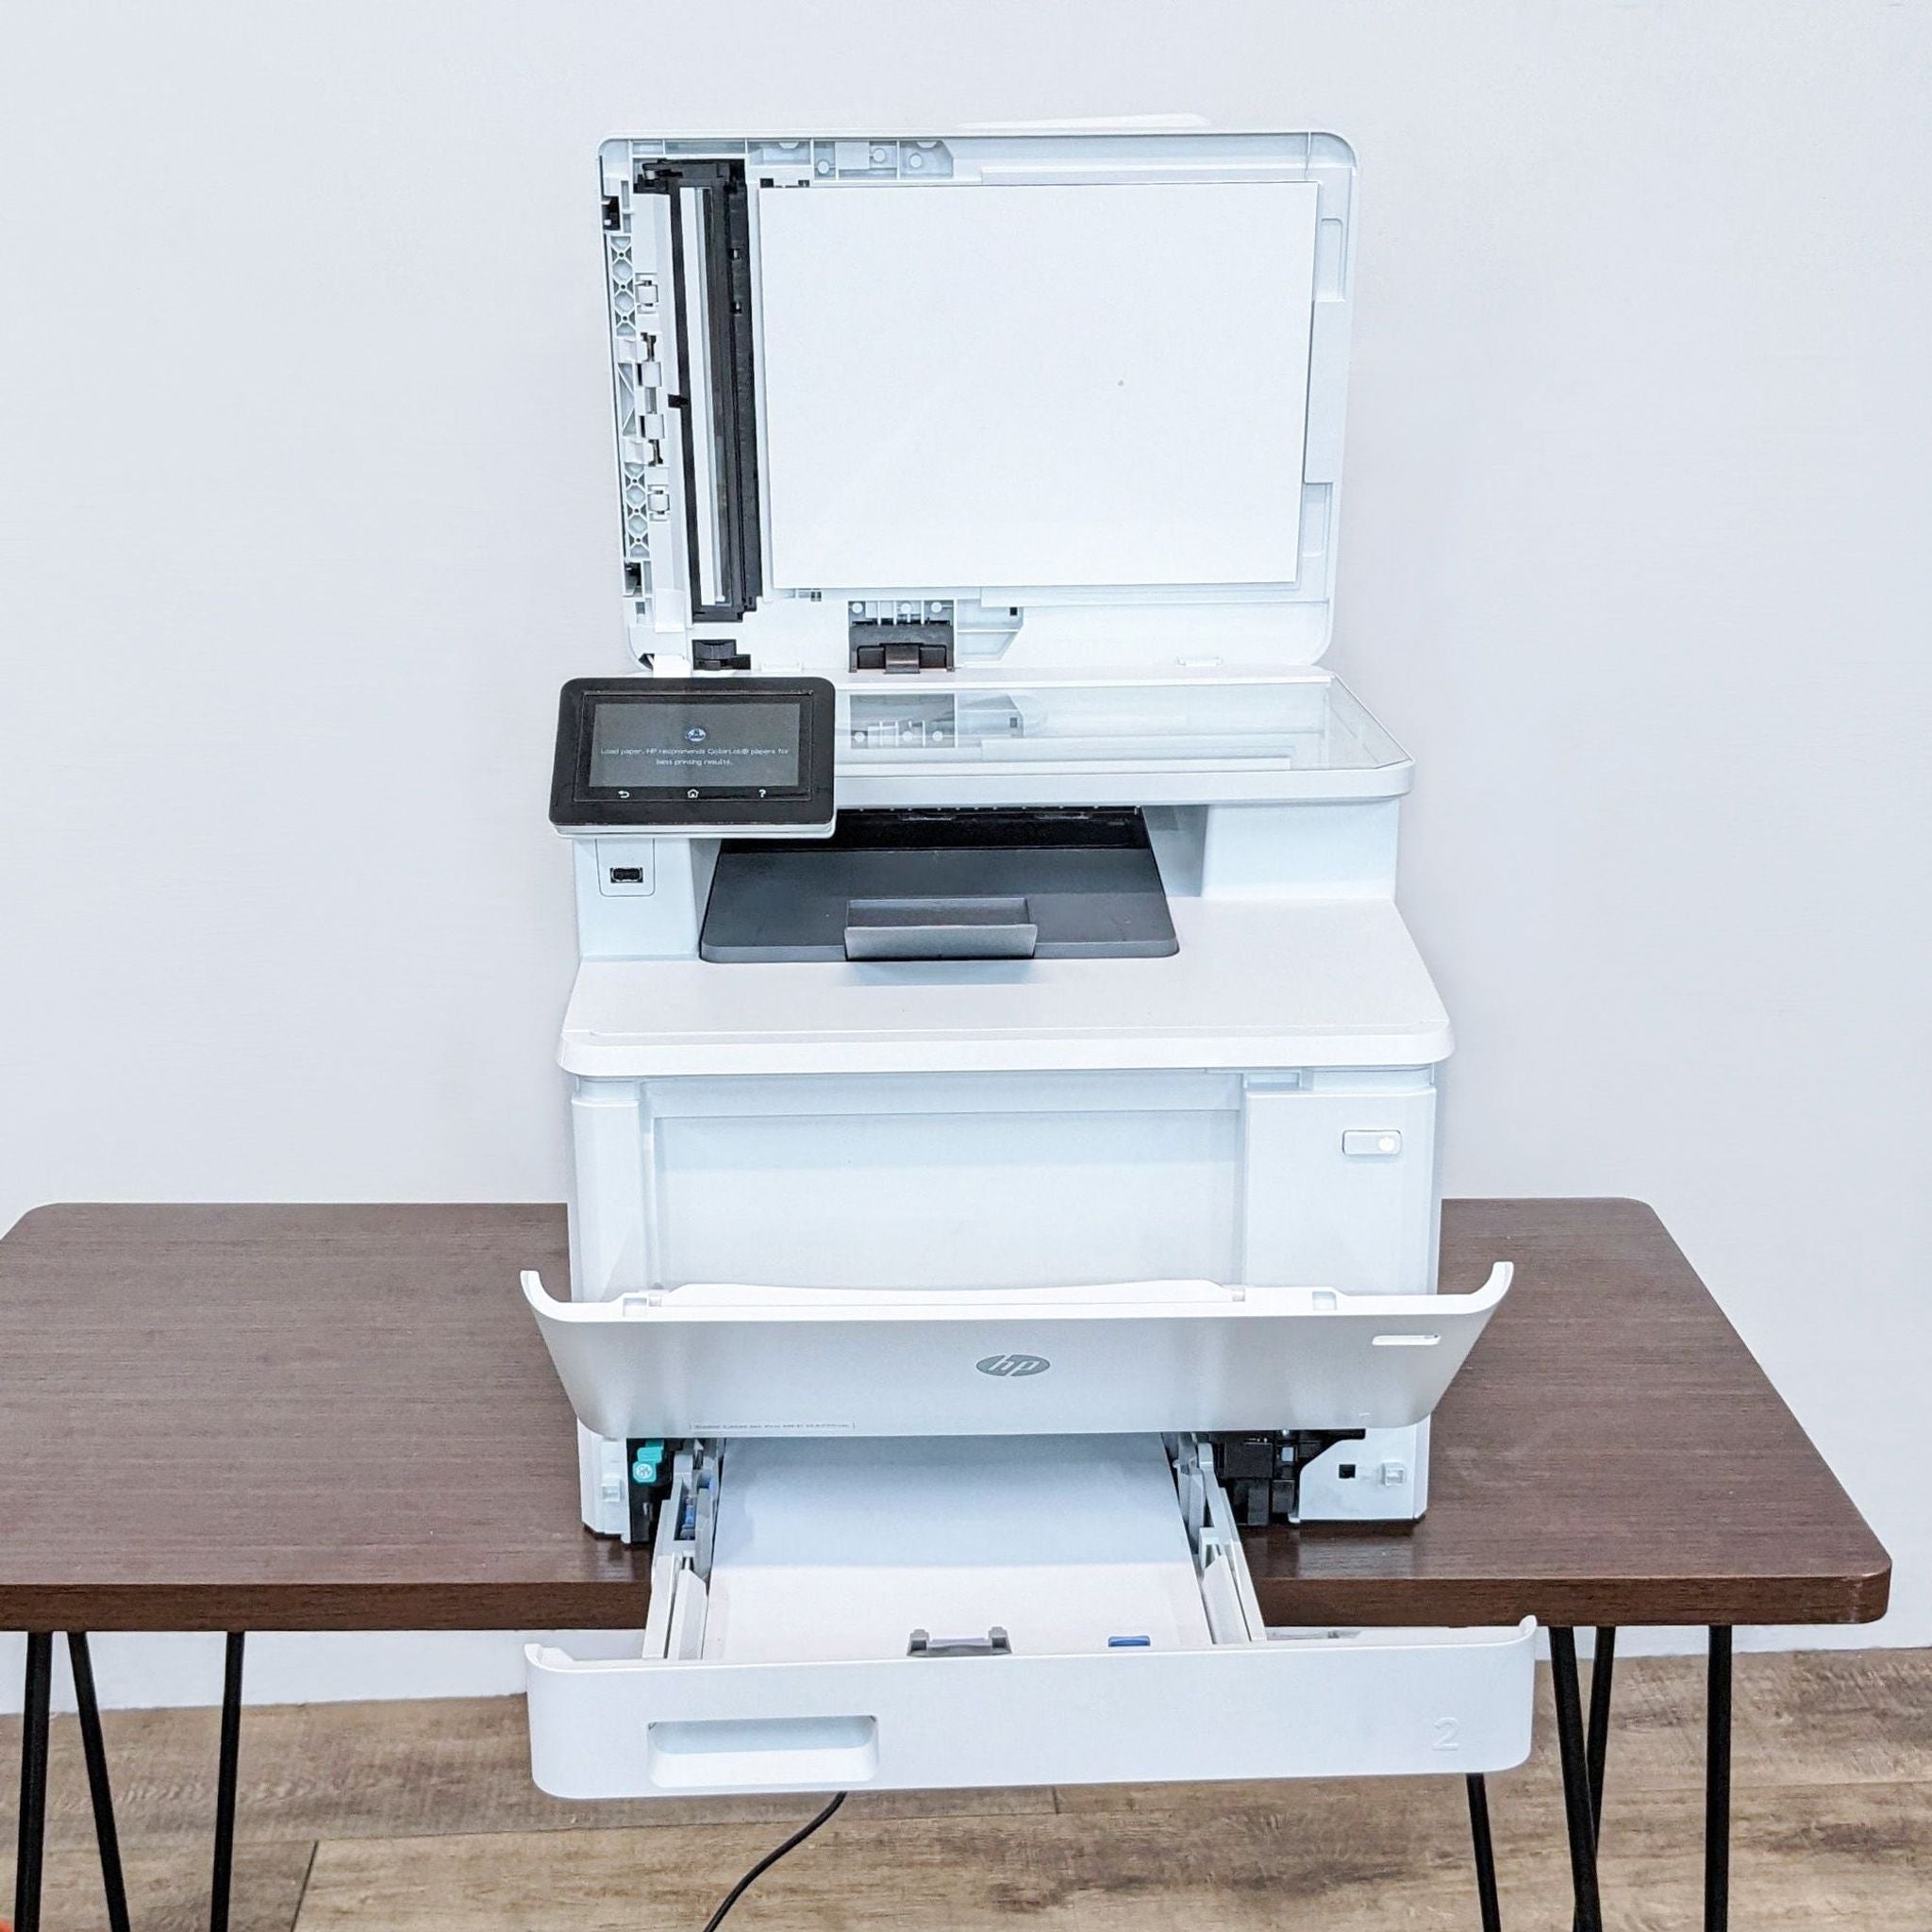 HP Color LaserJet Pro MFP open showing paper tray and scanner, with model label M477fnw.